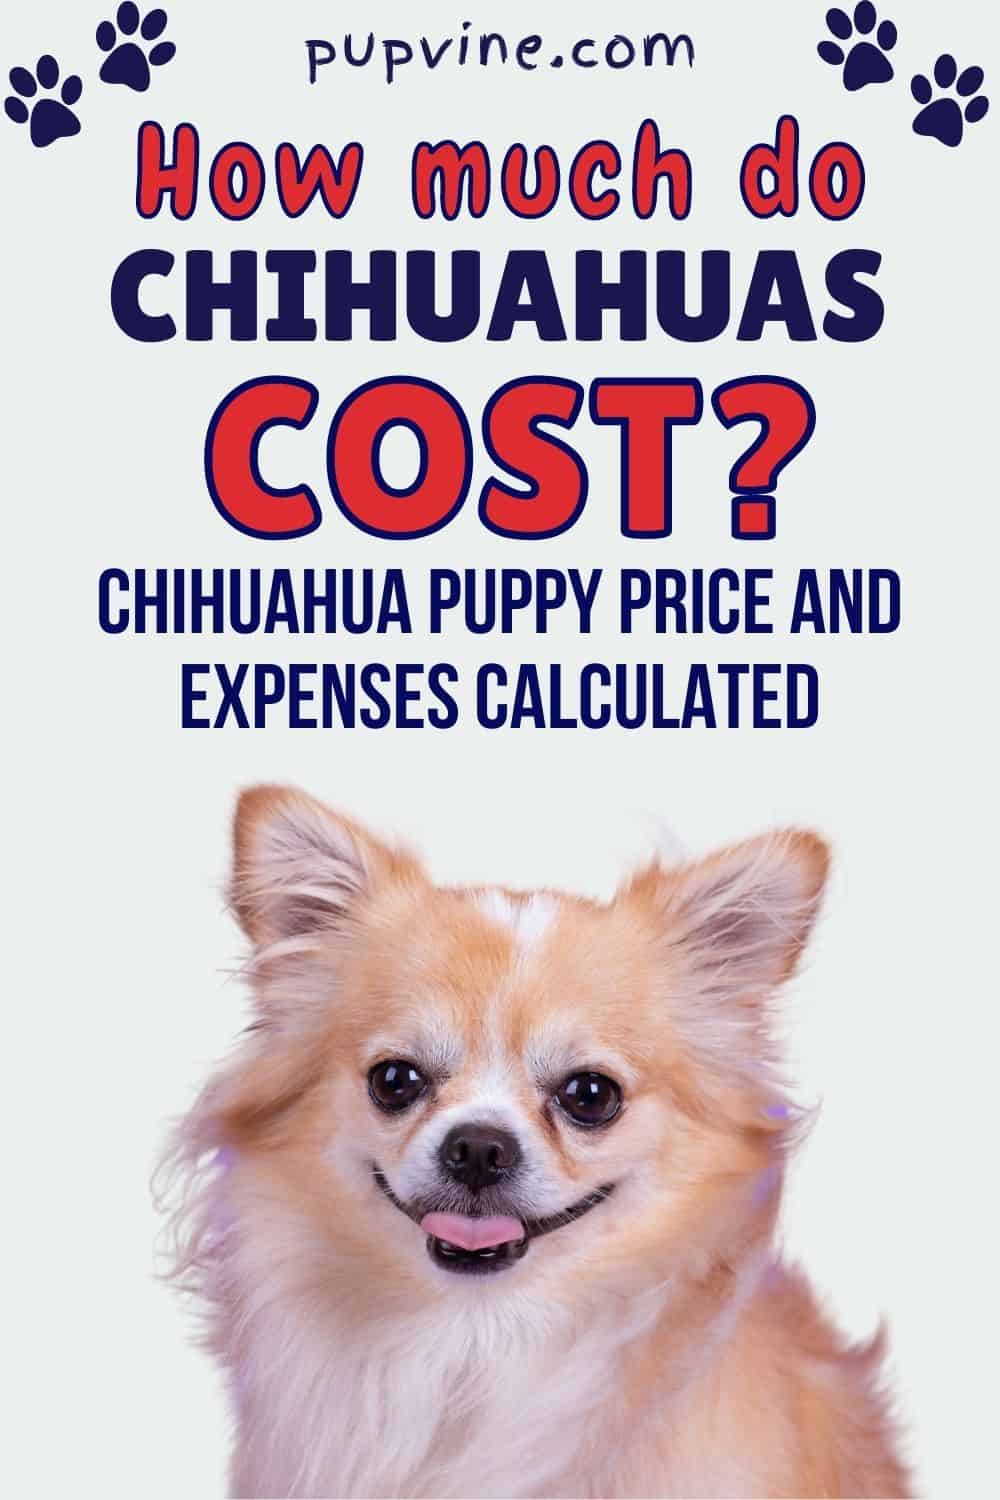 How Much Do Chihuahuas Cost? Chihuahua Puppy Price And Expenses Calculated